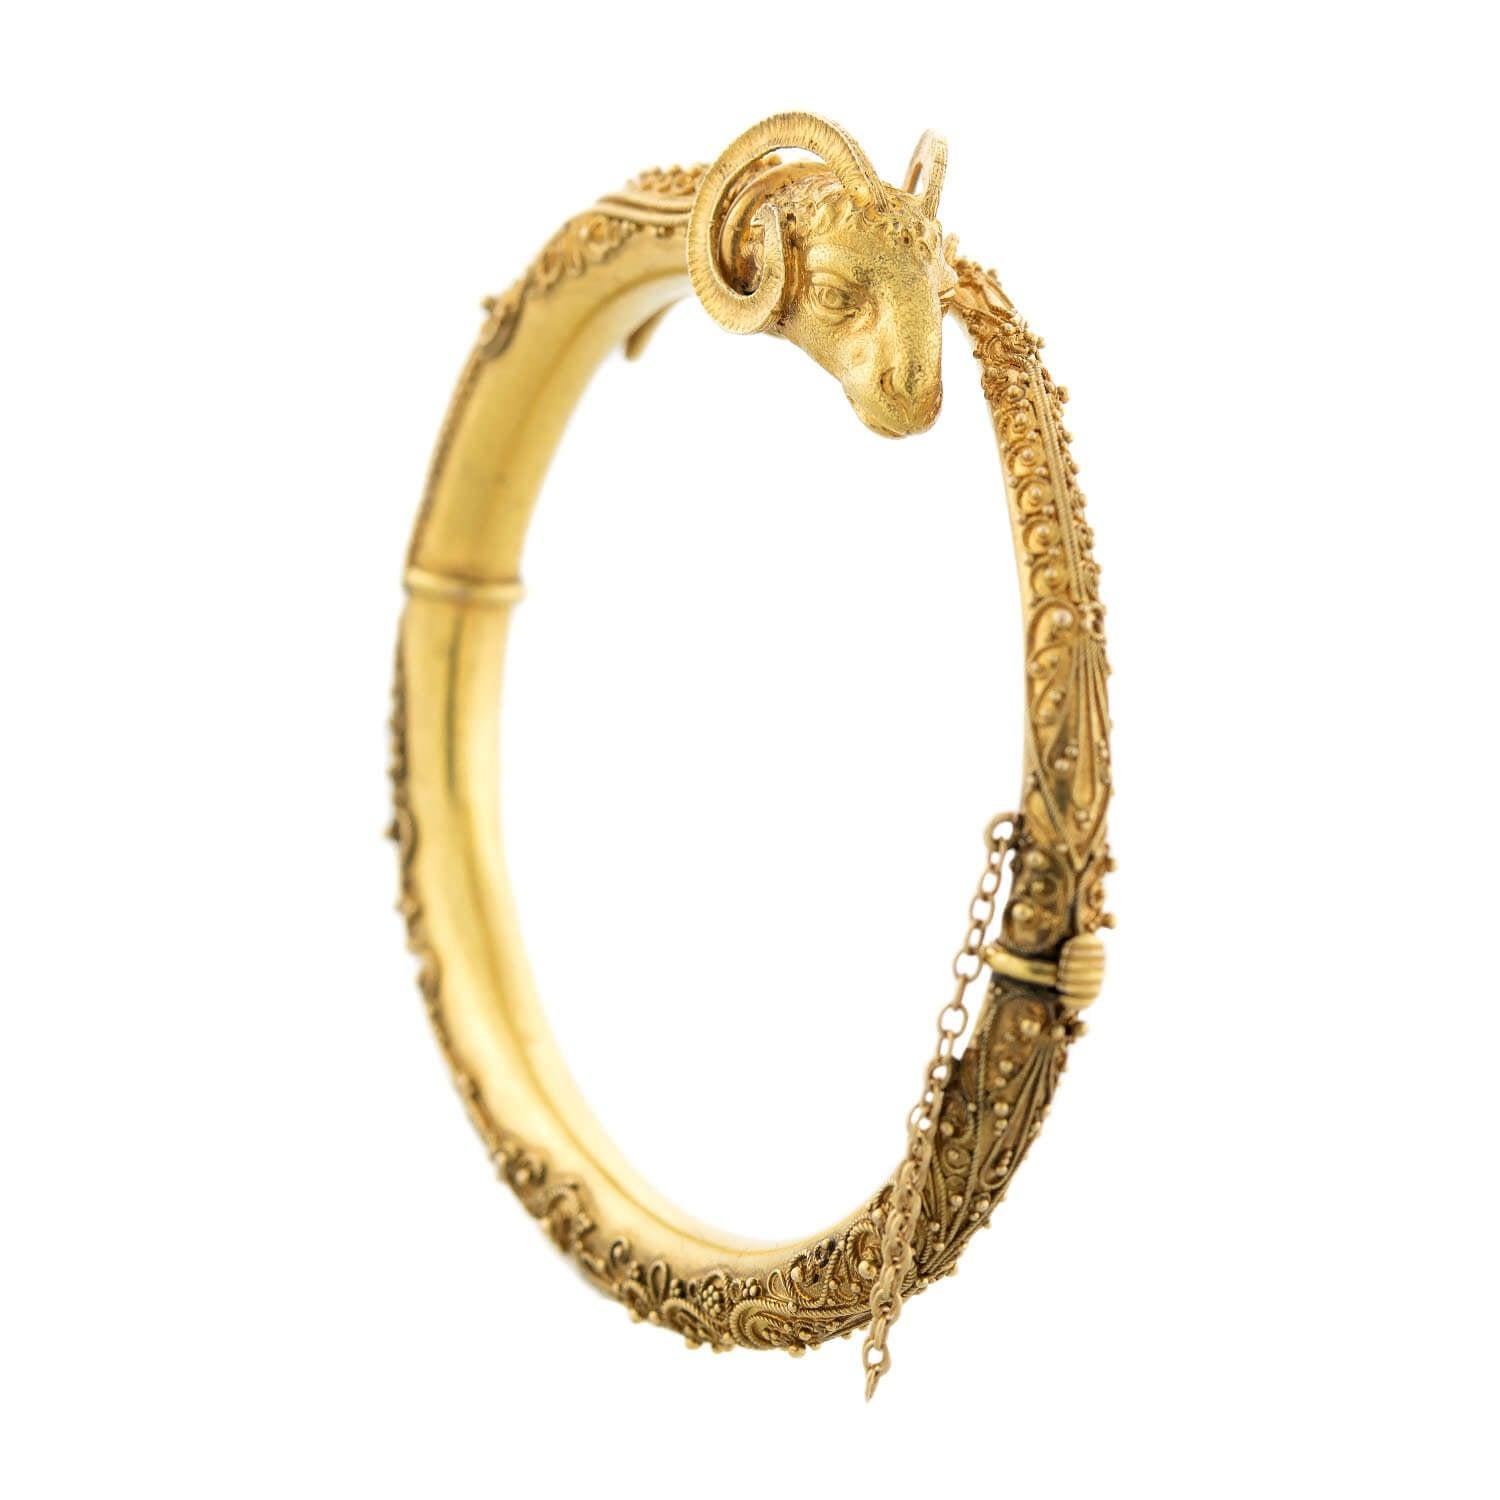 An impressive statement bracelet from the Victorian (ca1880) era! Crafted in 15k gold, the bangle incorporates a ram's head motif into a stylish bypass design with his own tail. The 3-dimensional ram's head is incredibly detailed, including curling